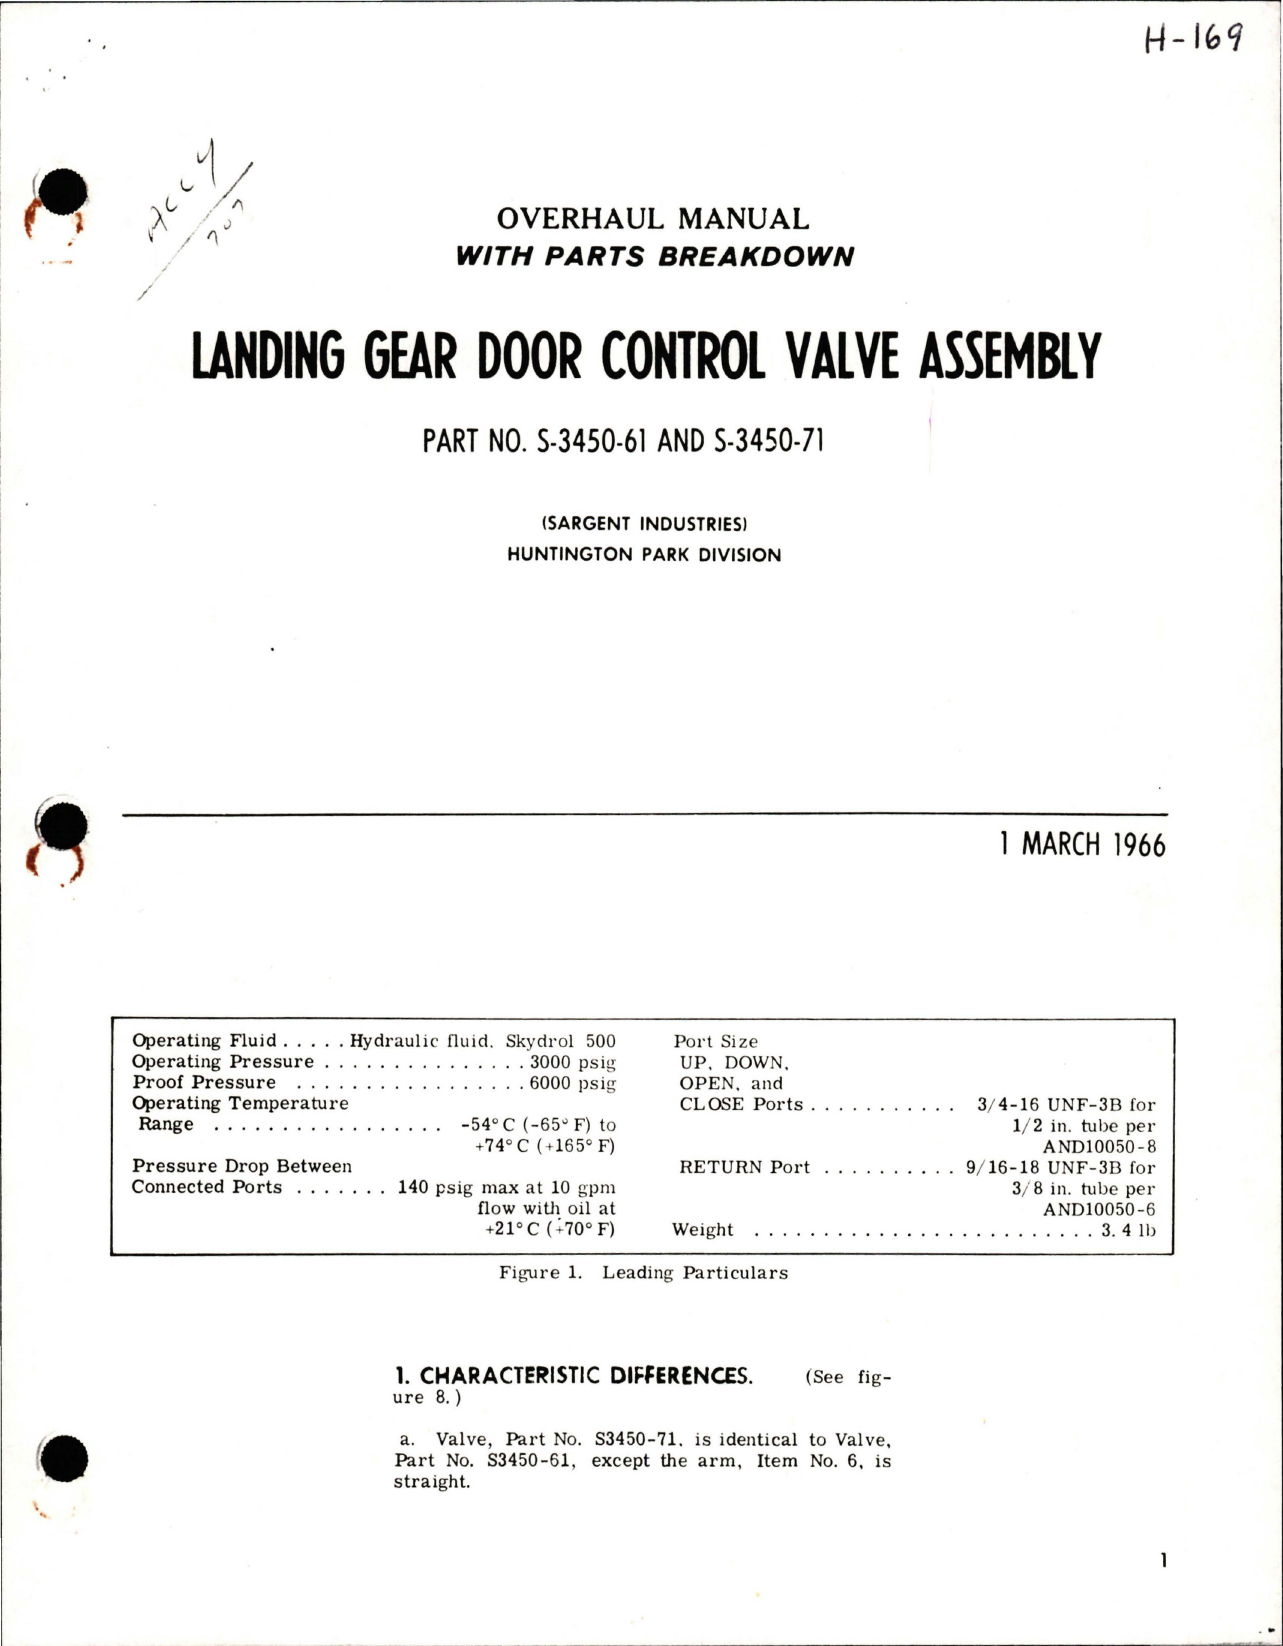 Sample page 1 from AirCorps Library document: Overhaul Manual with Parts for Landing Gear Door Control Valve Assembly - Parts S-3450-61 and S-3450-71